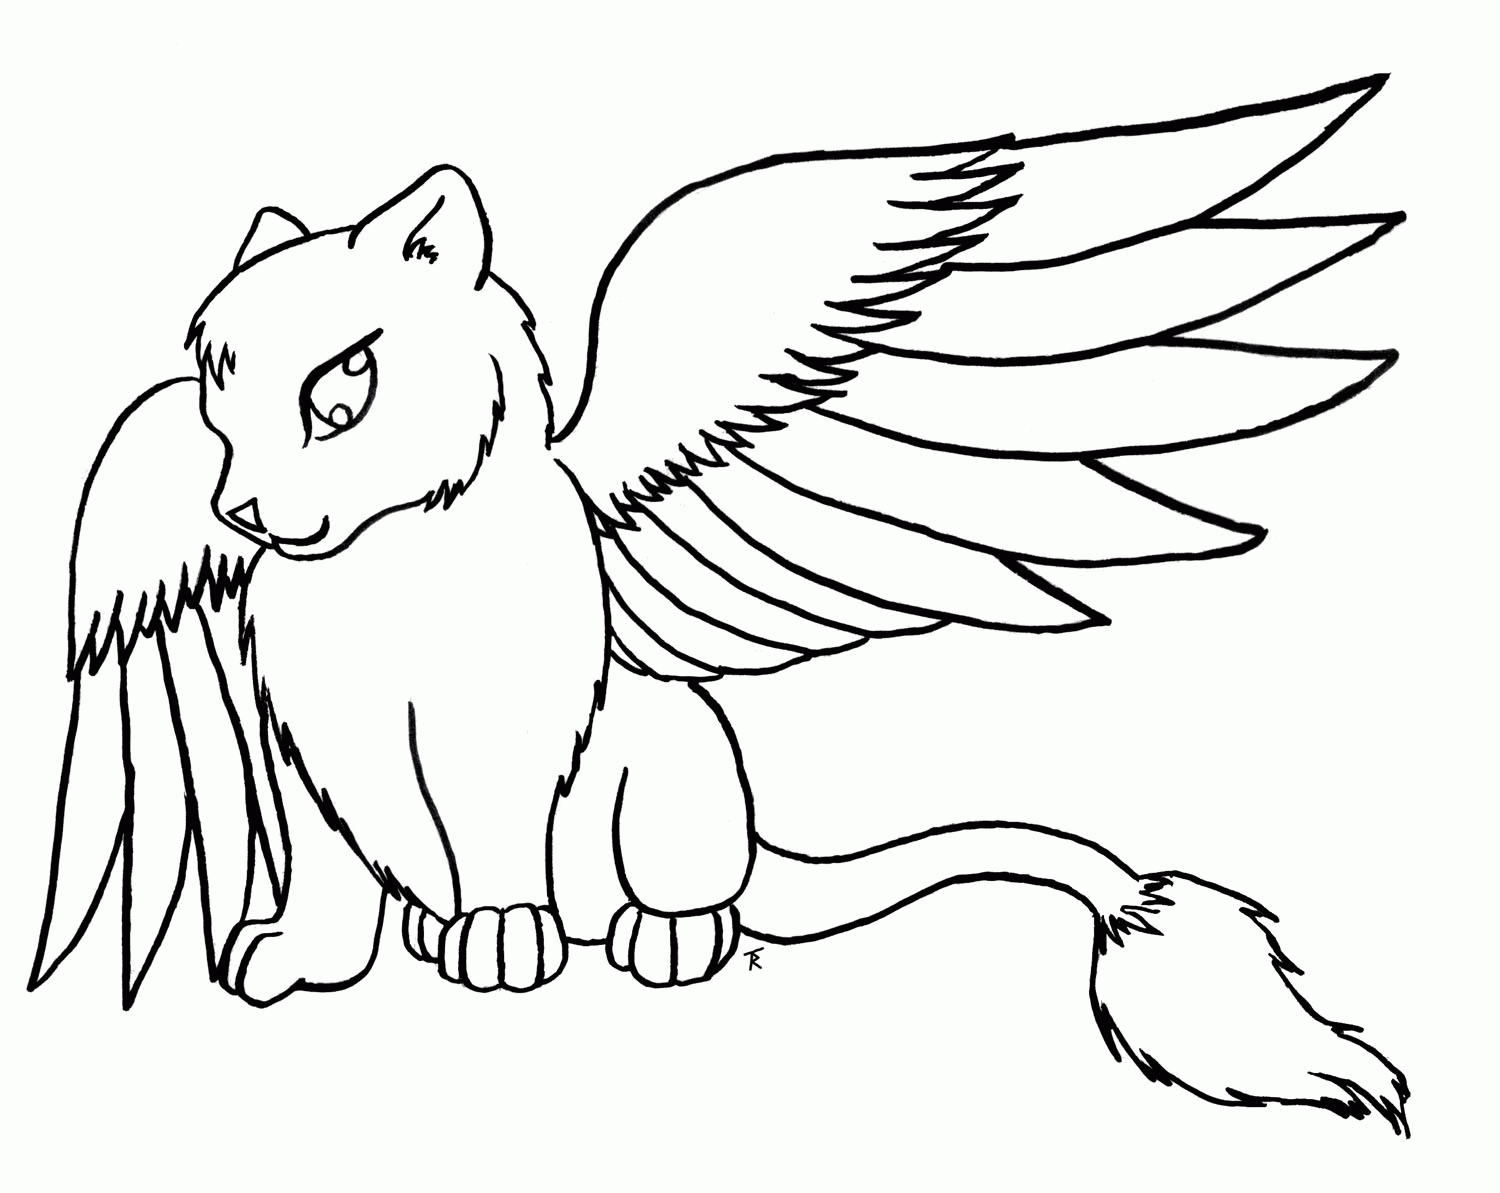 Free Wolves With Wings Coloring Pages, Download Free Clip Art, Free